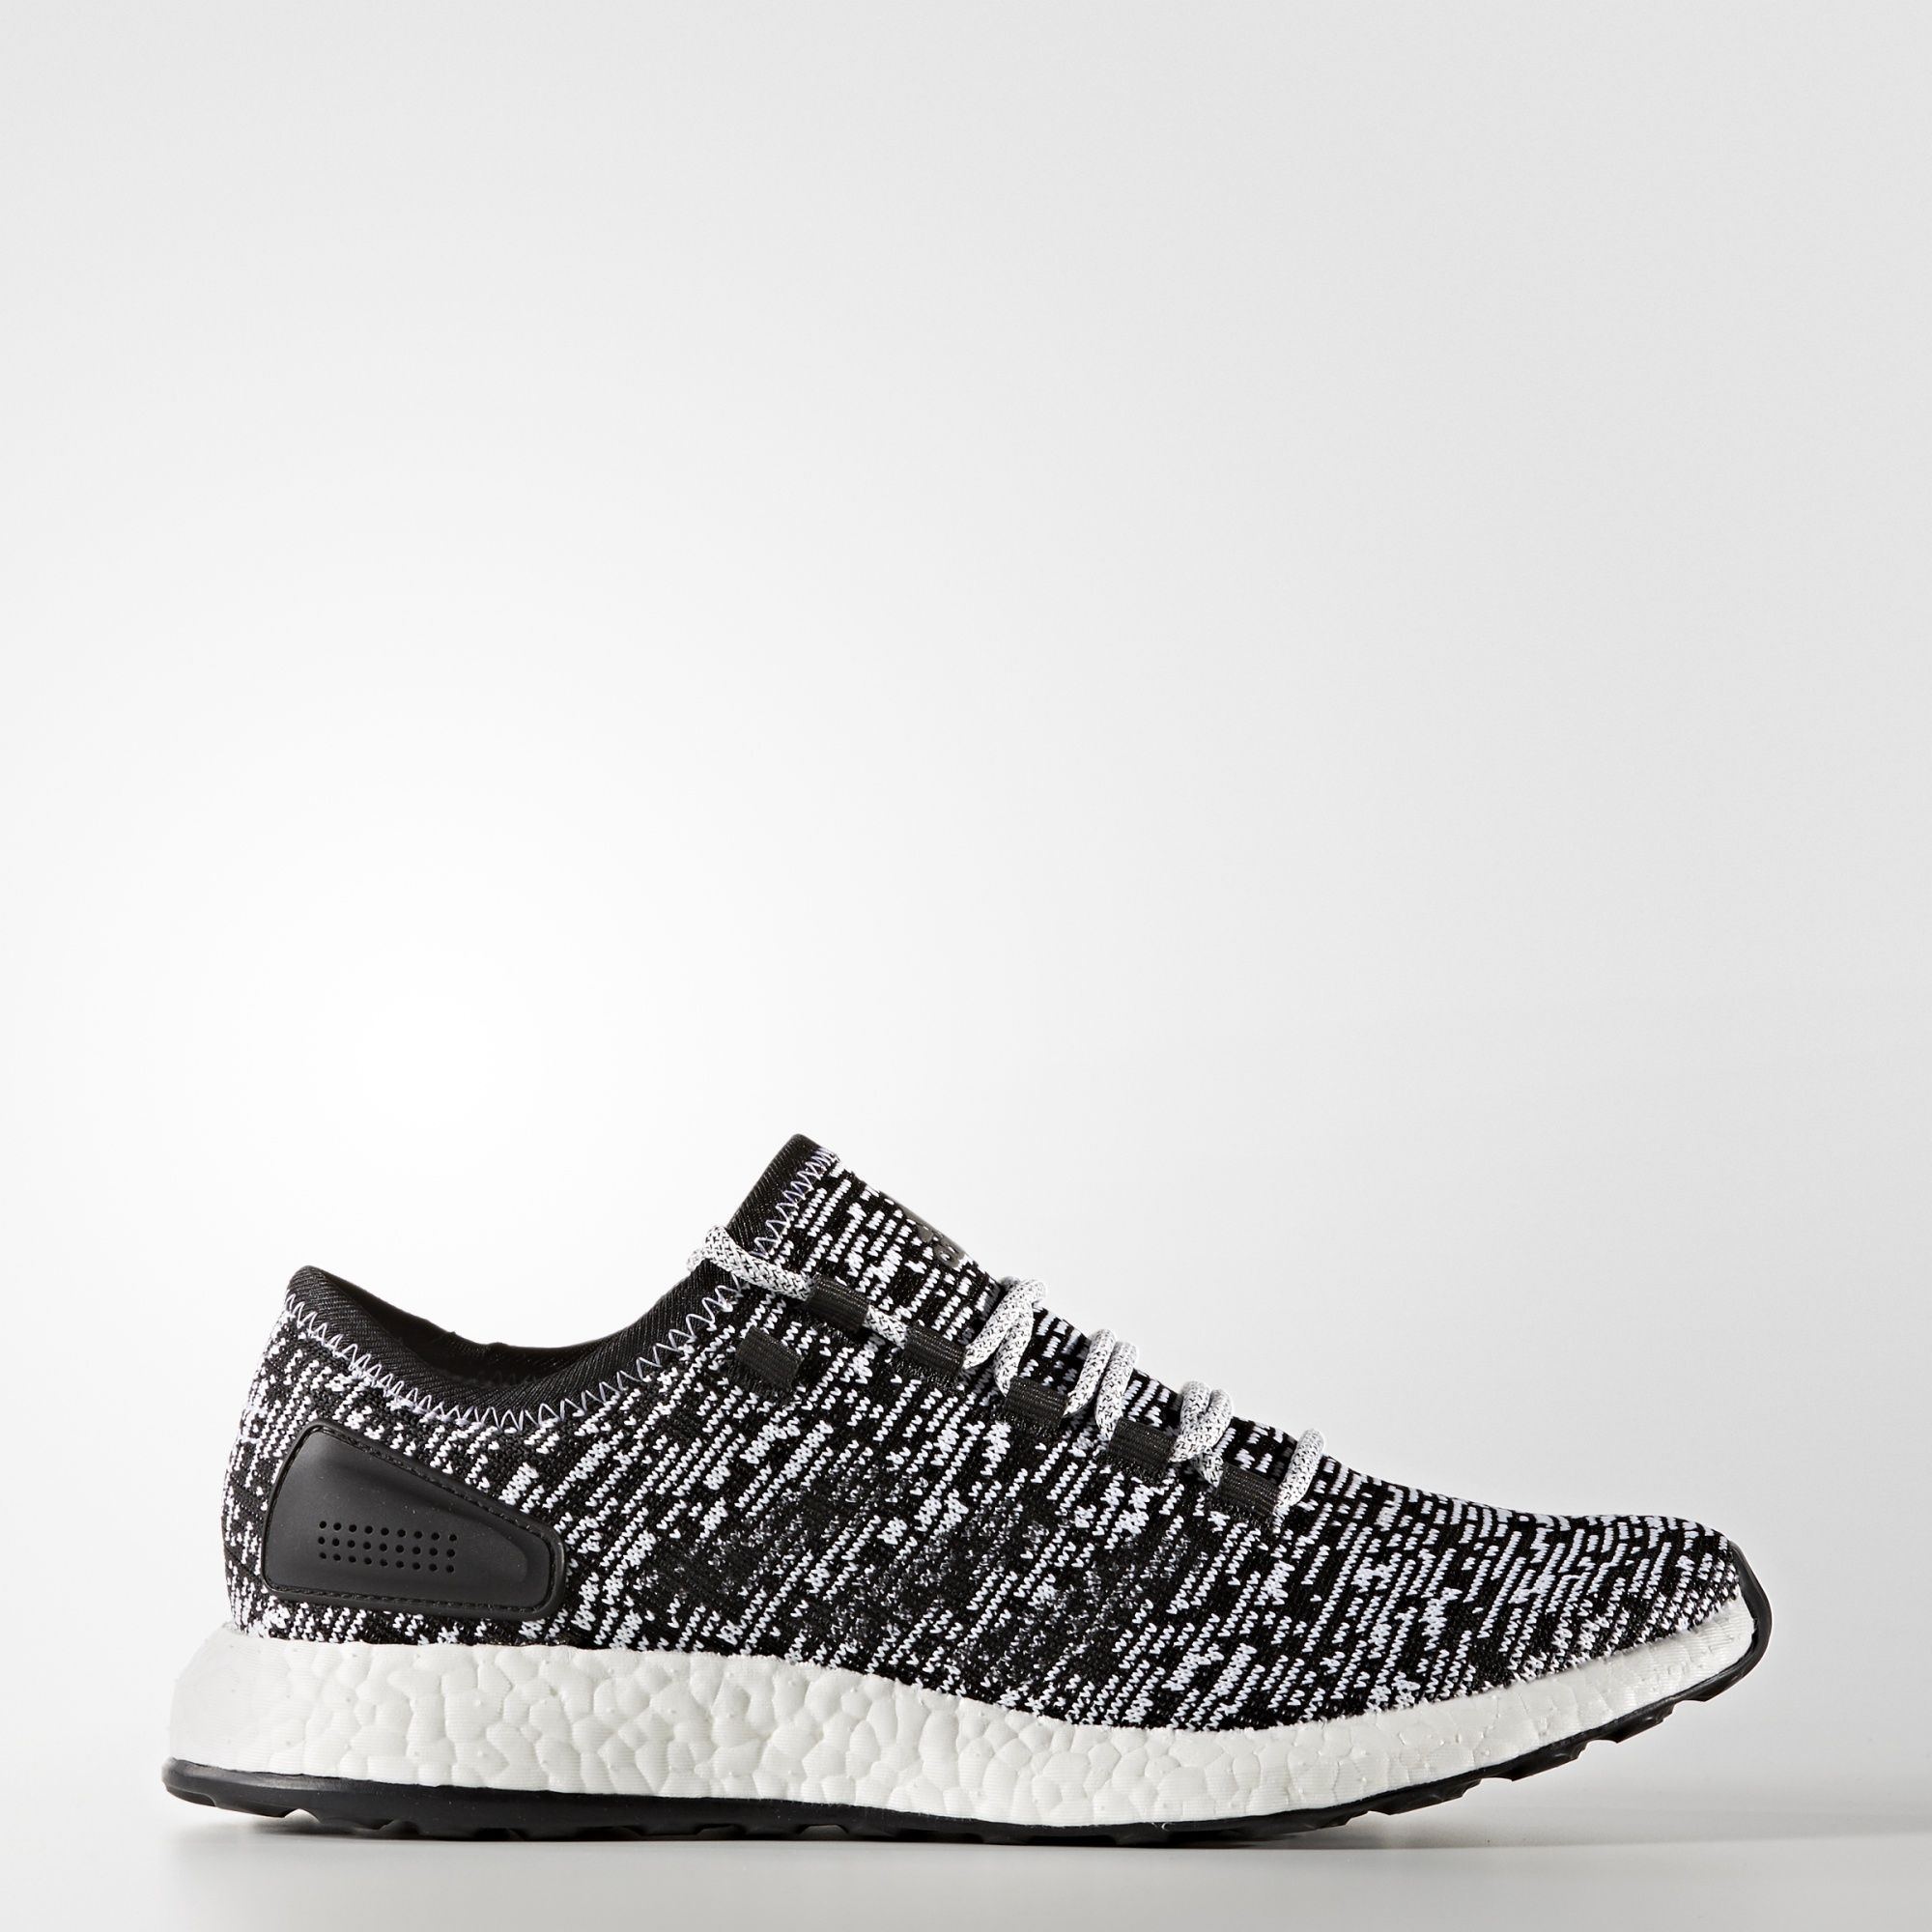 Discount Adidas Pure Boost Black/White Mens Running Shoes Online Uk